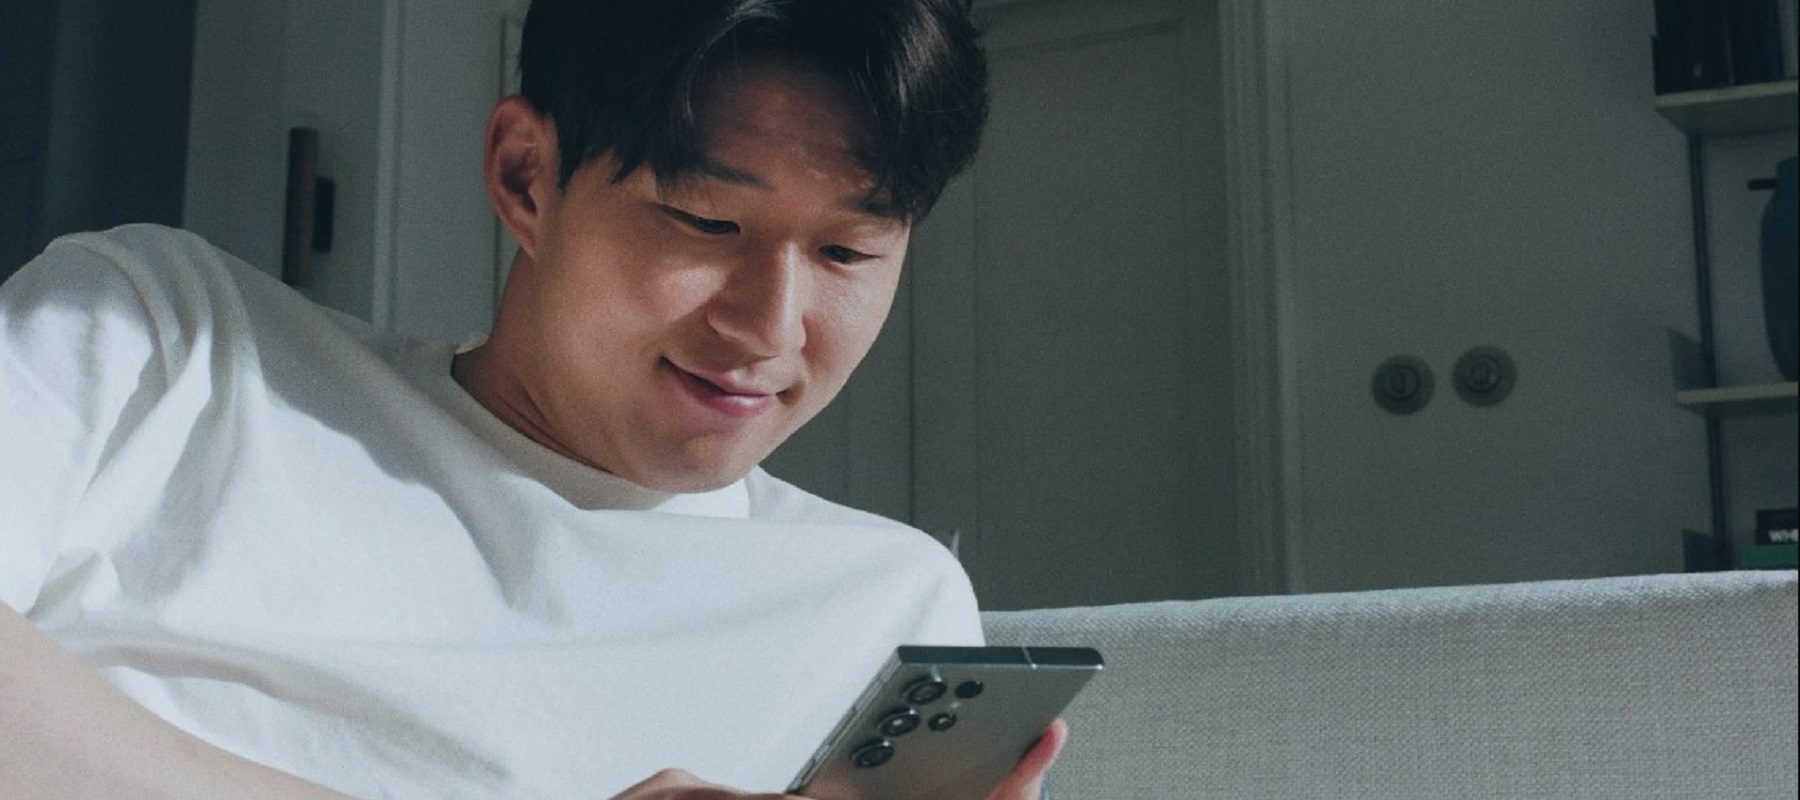 Samsung releases ‘Everyday SmartThings with Son’ campaign video